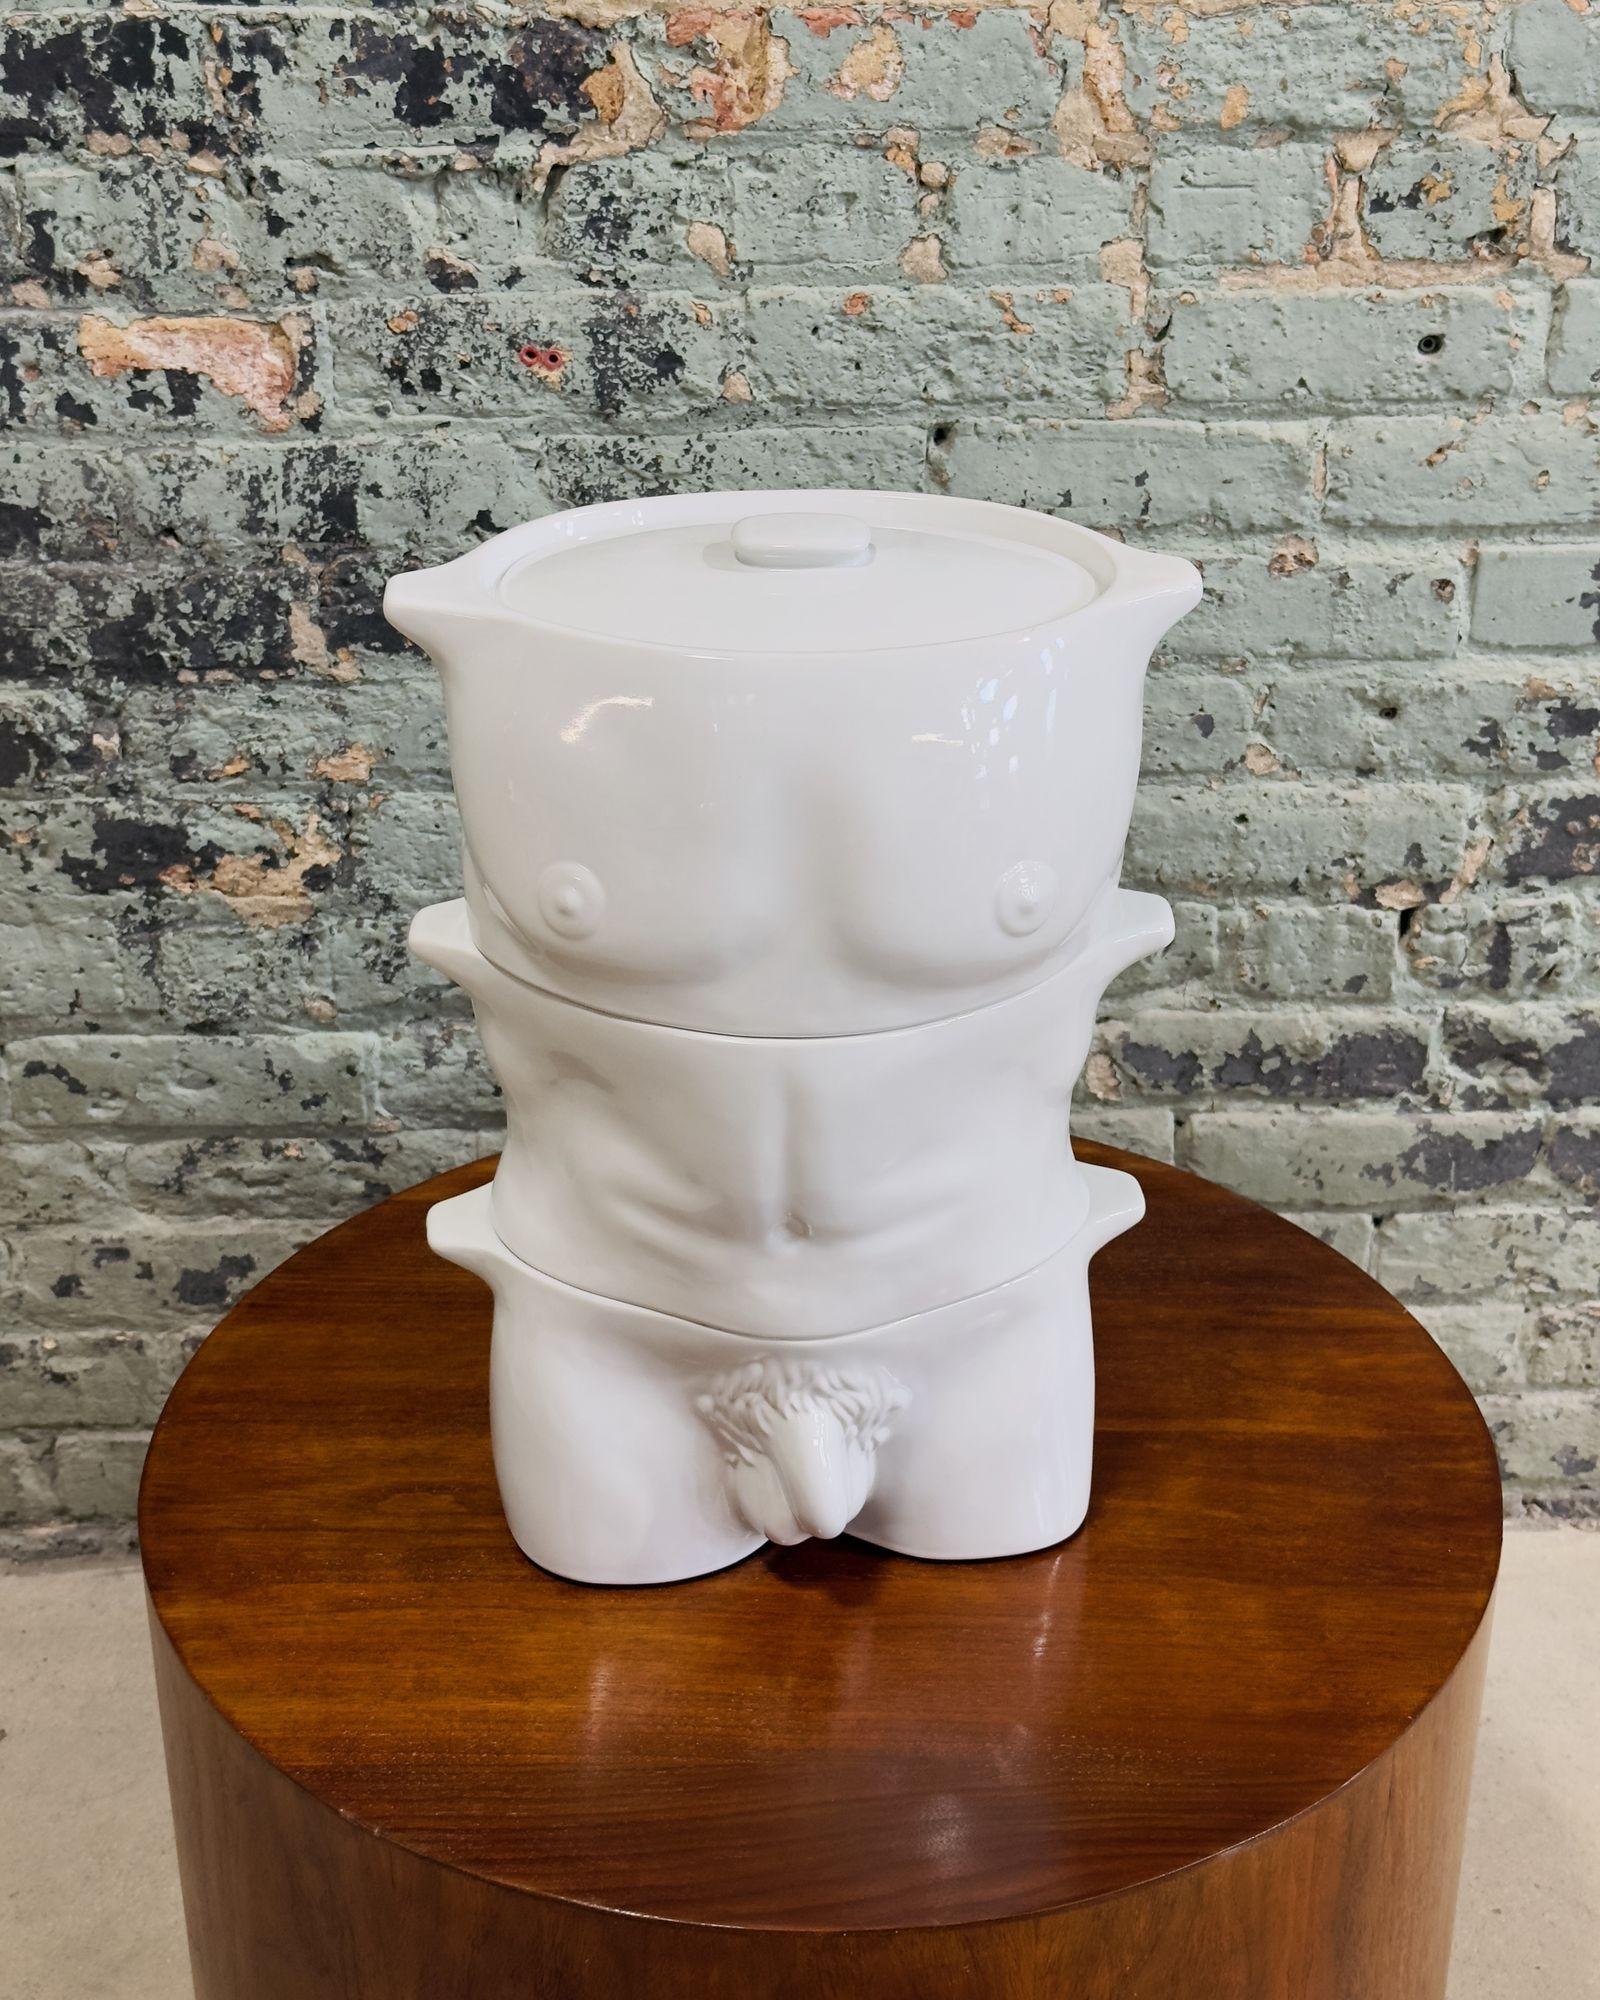 Fleshpot - Morris Rushton England, 1970.
Fleshpot's are highly collectible and a award winning casserole set in white ceramic by Morris Rushton England. It is a 3 part nude torso of a man.